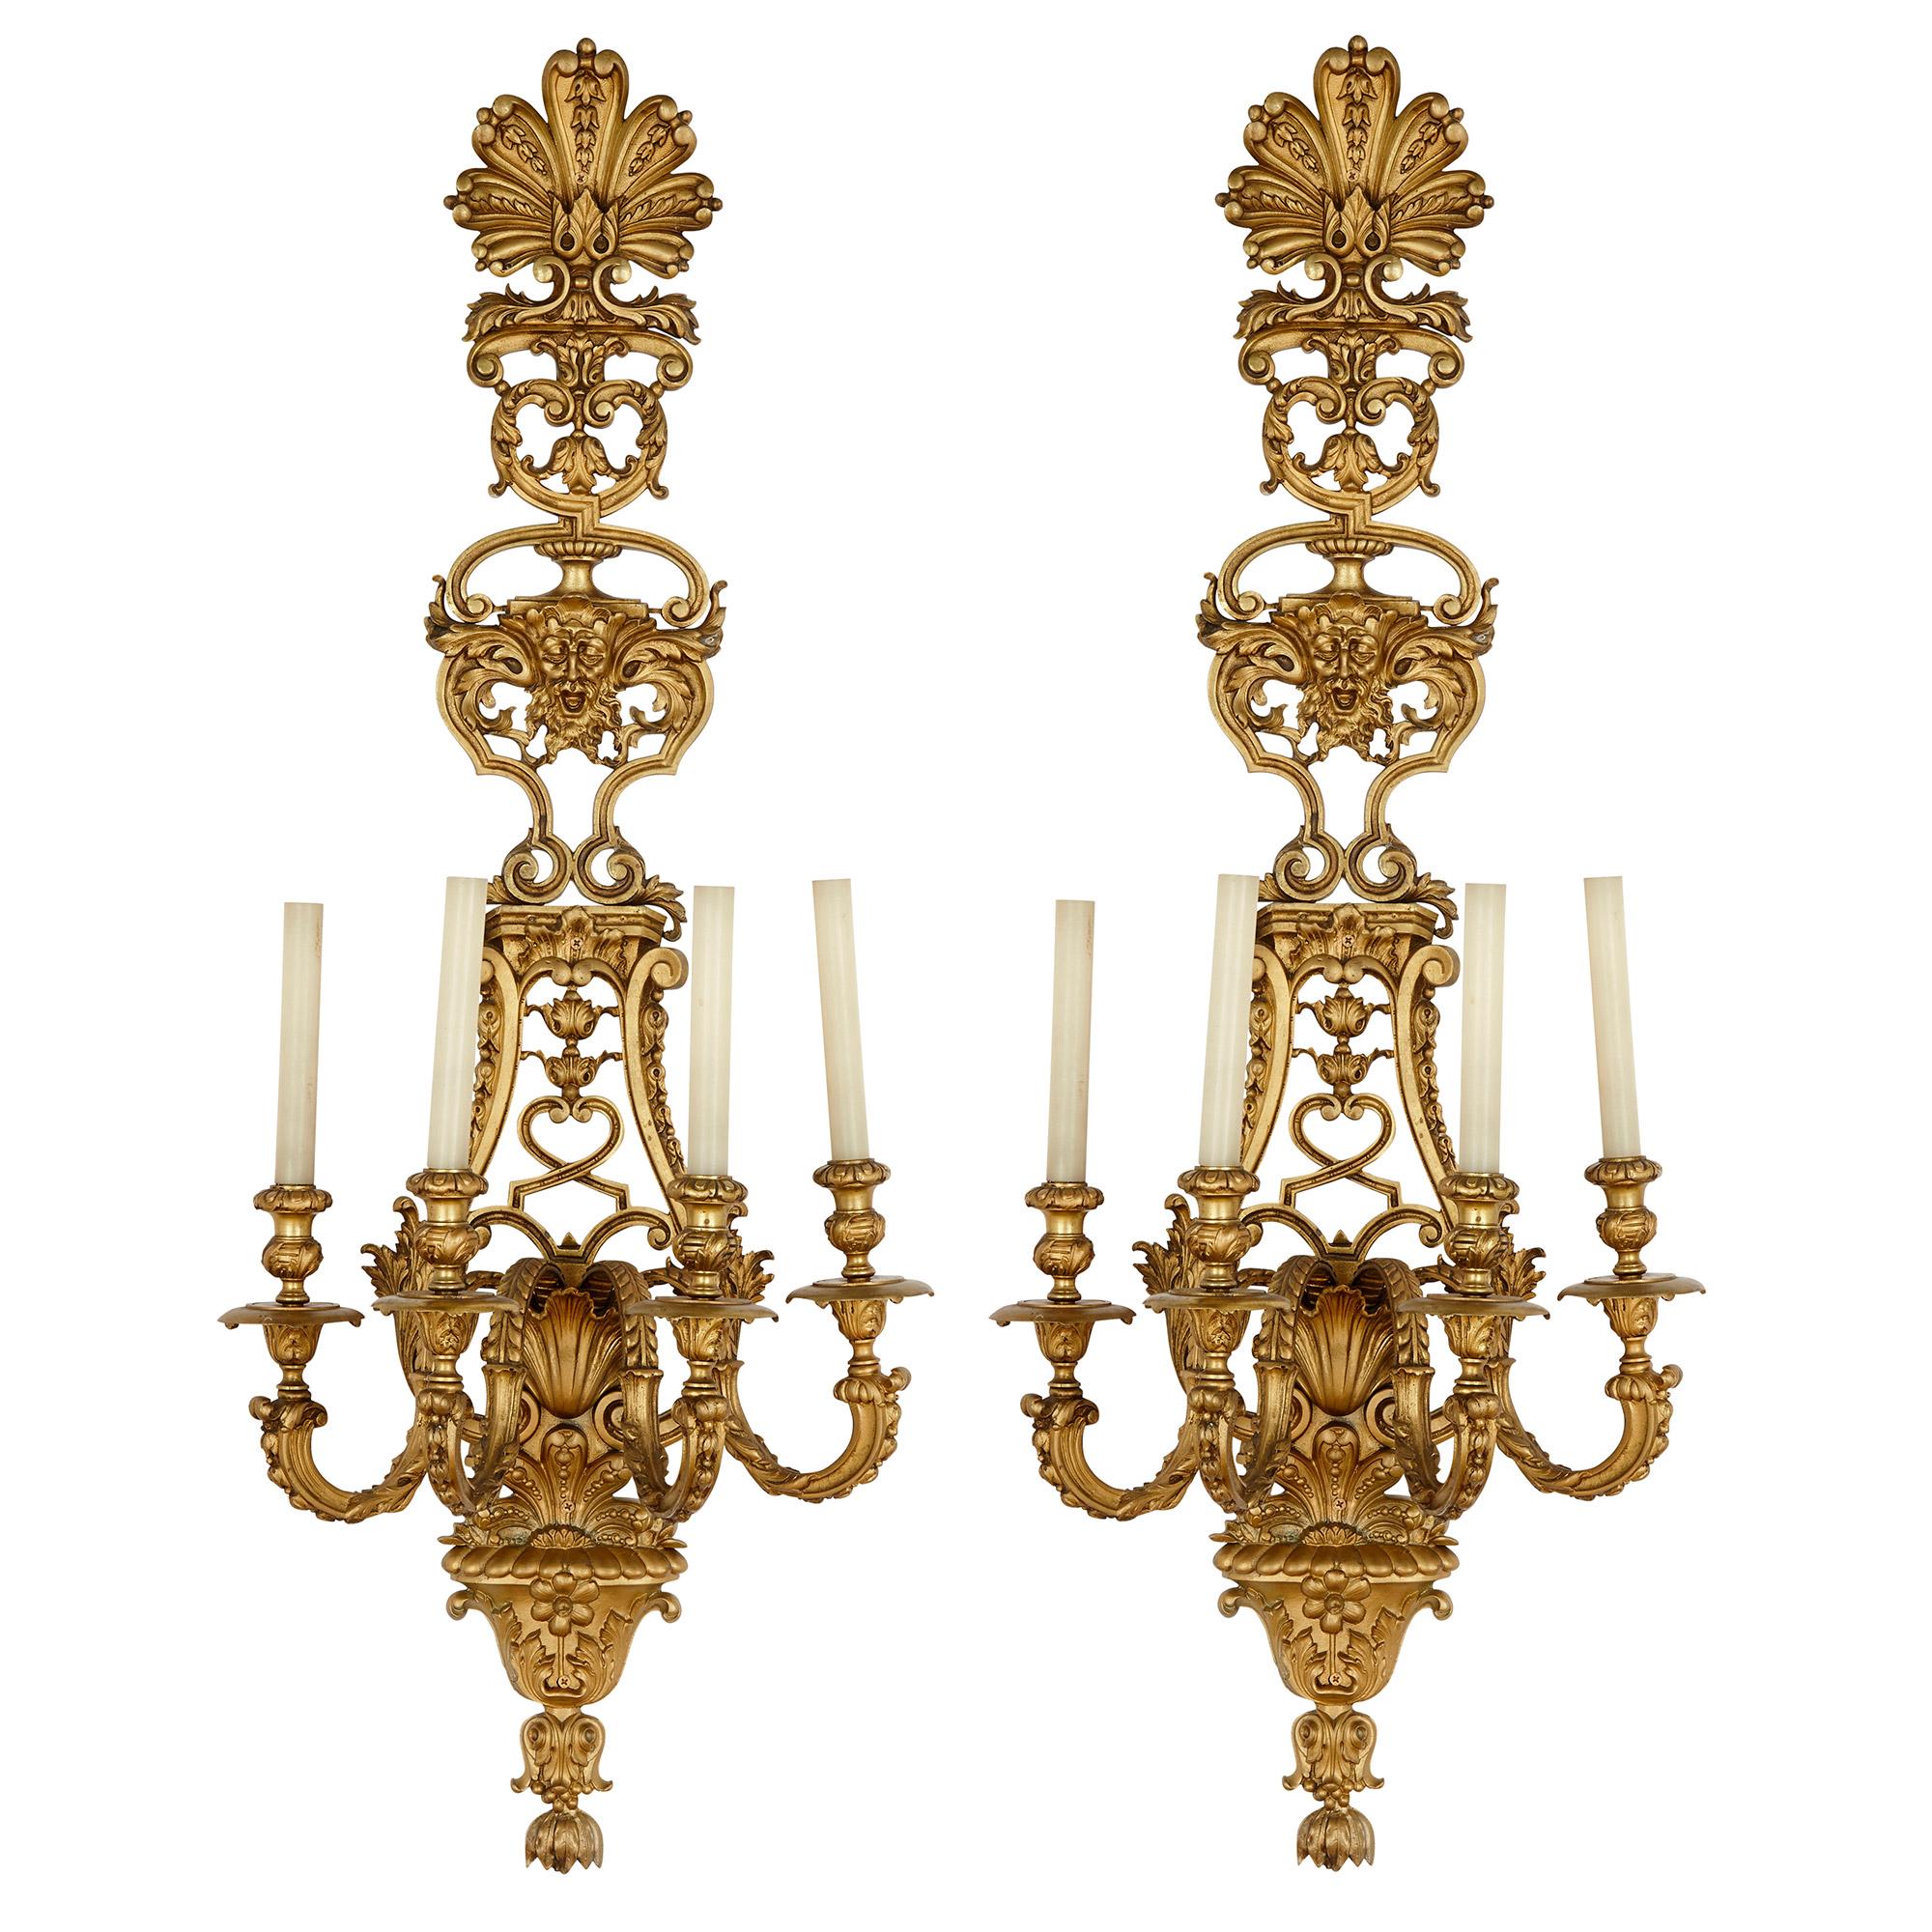 The gilt bronze sconces in this set of four are designed in the beautiful Regency style, the manner of decorative art that most closely aligns with the early Rococo yet betrays the lingering influence of Louis XIV. Each sconce features a shaped and